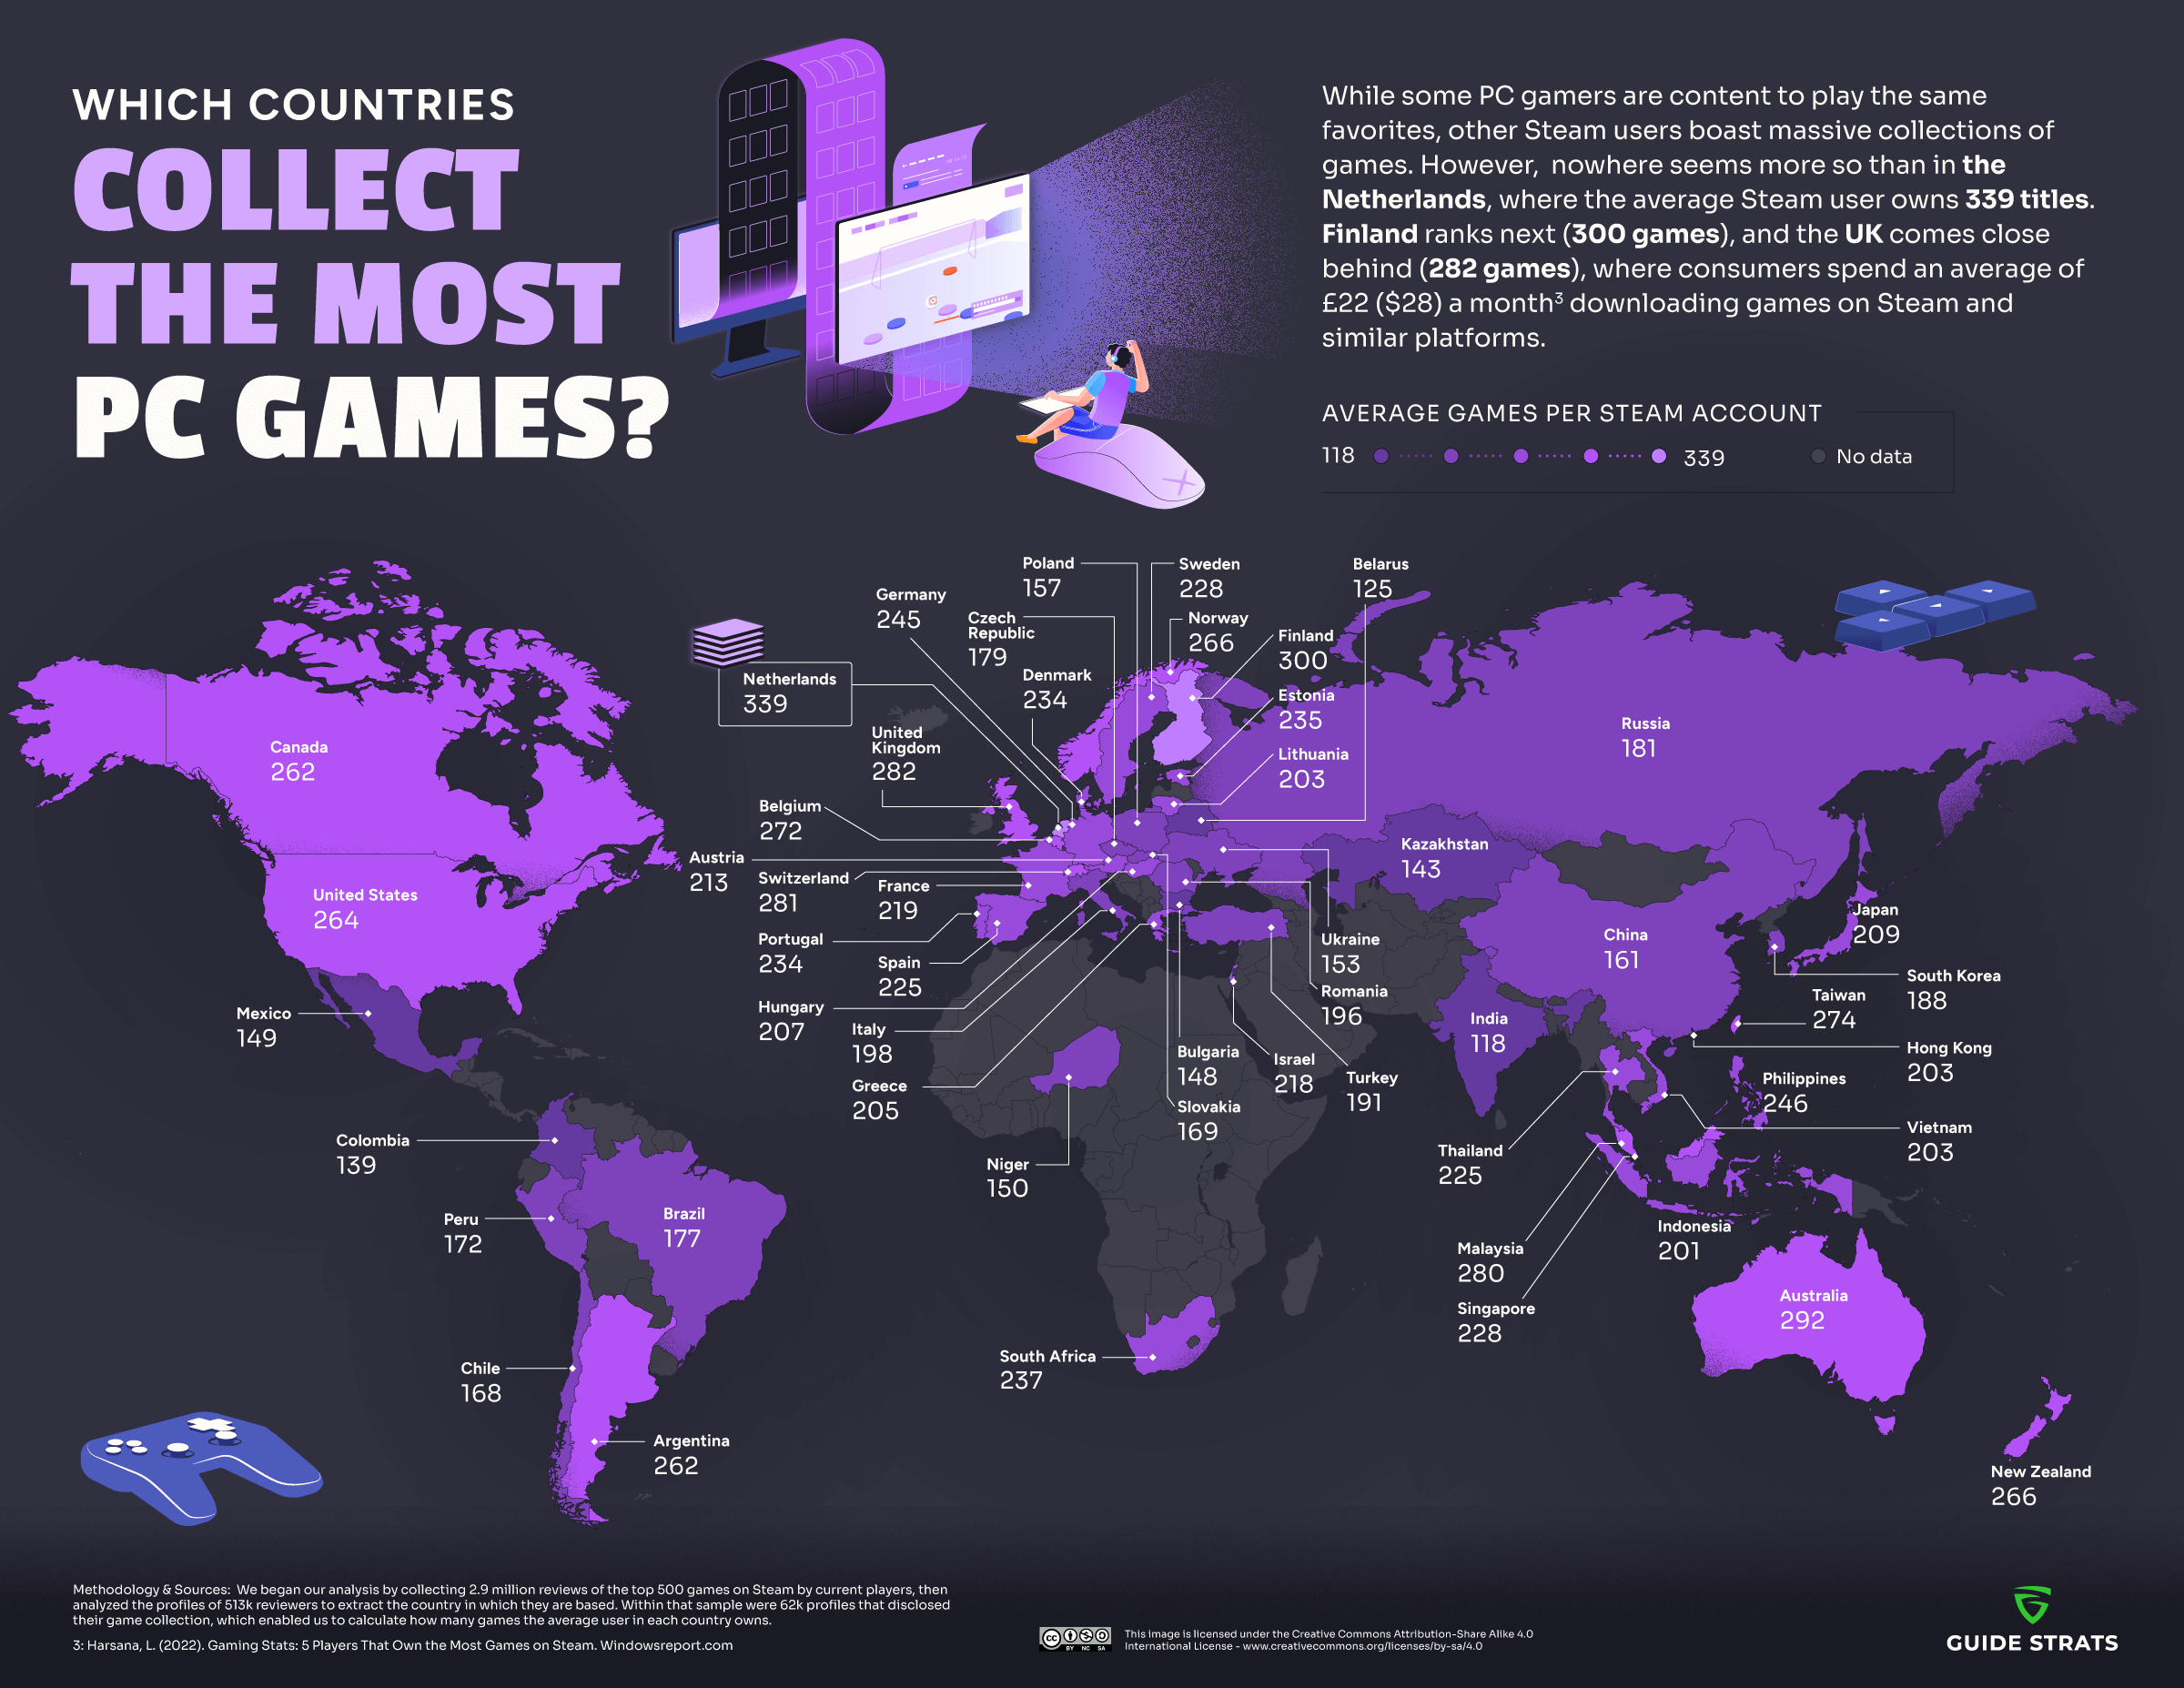 The Countries that collect the most PC games (Infographic)